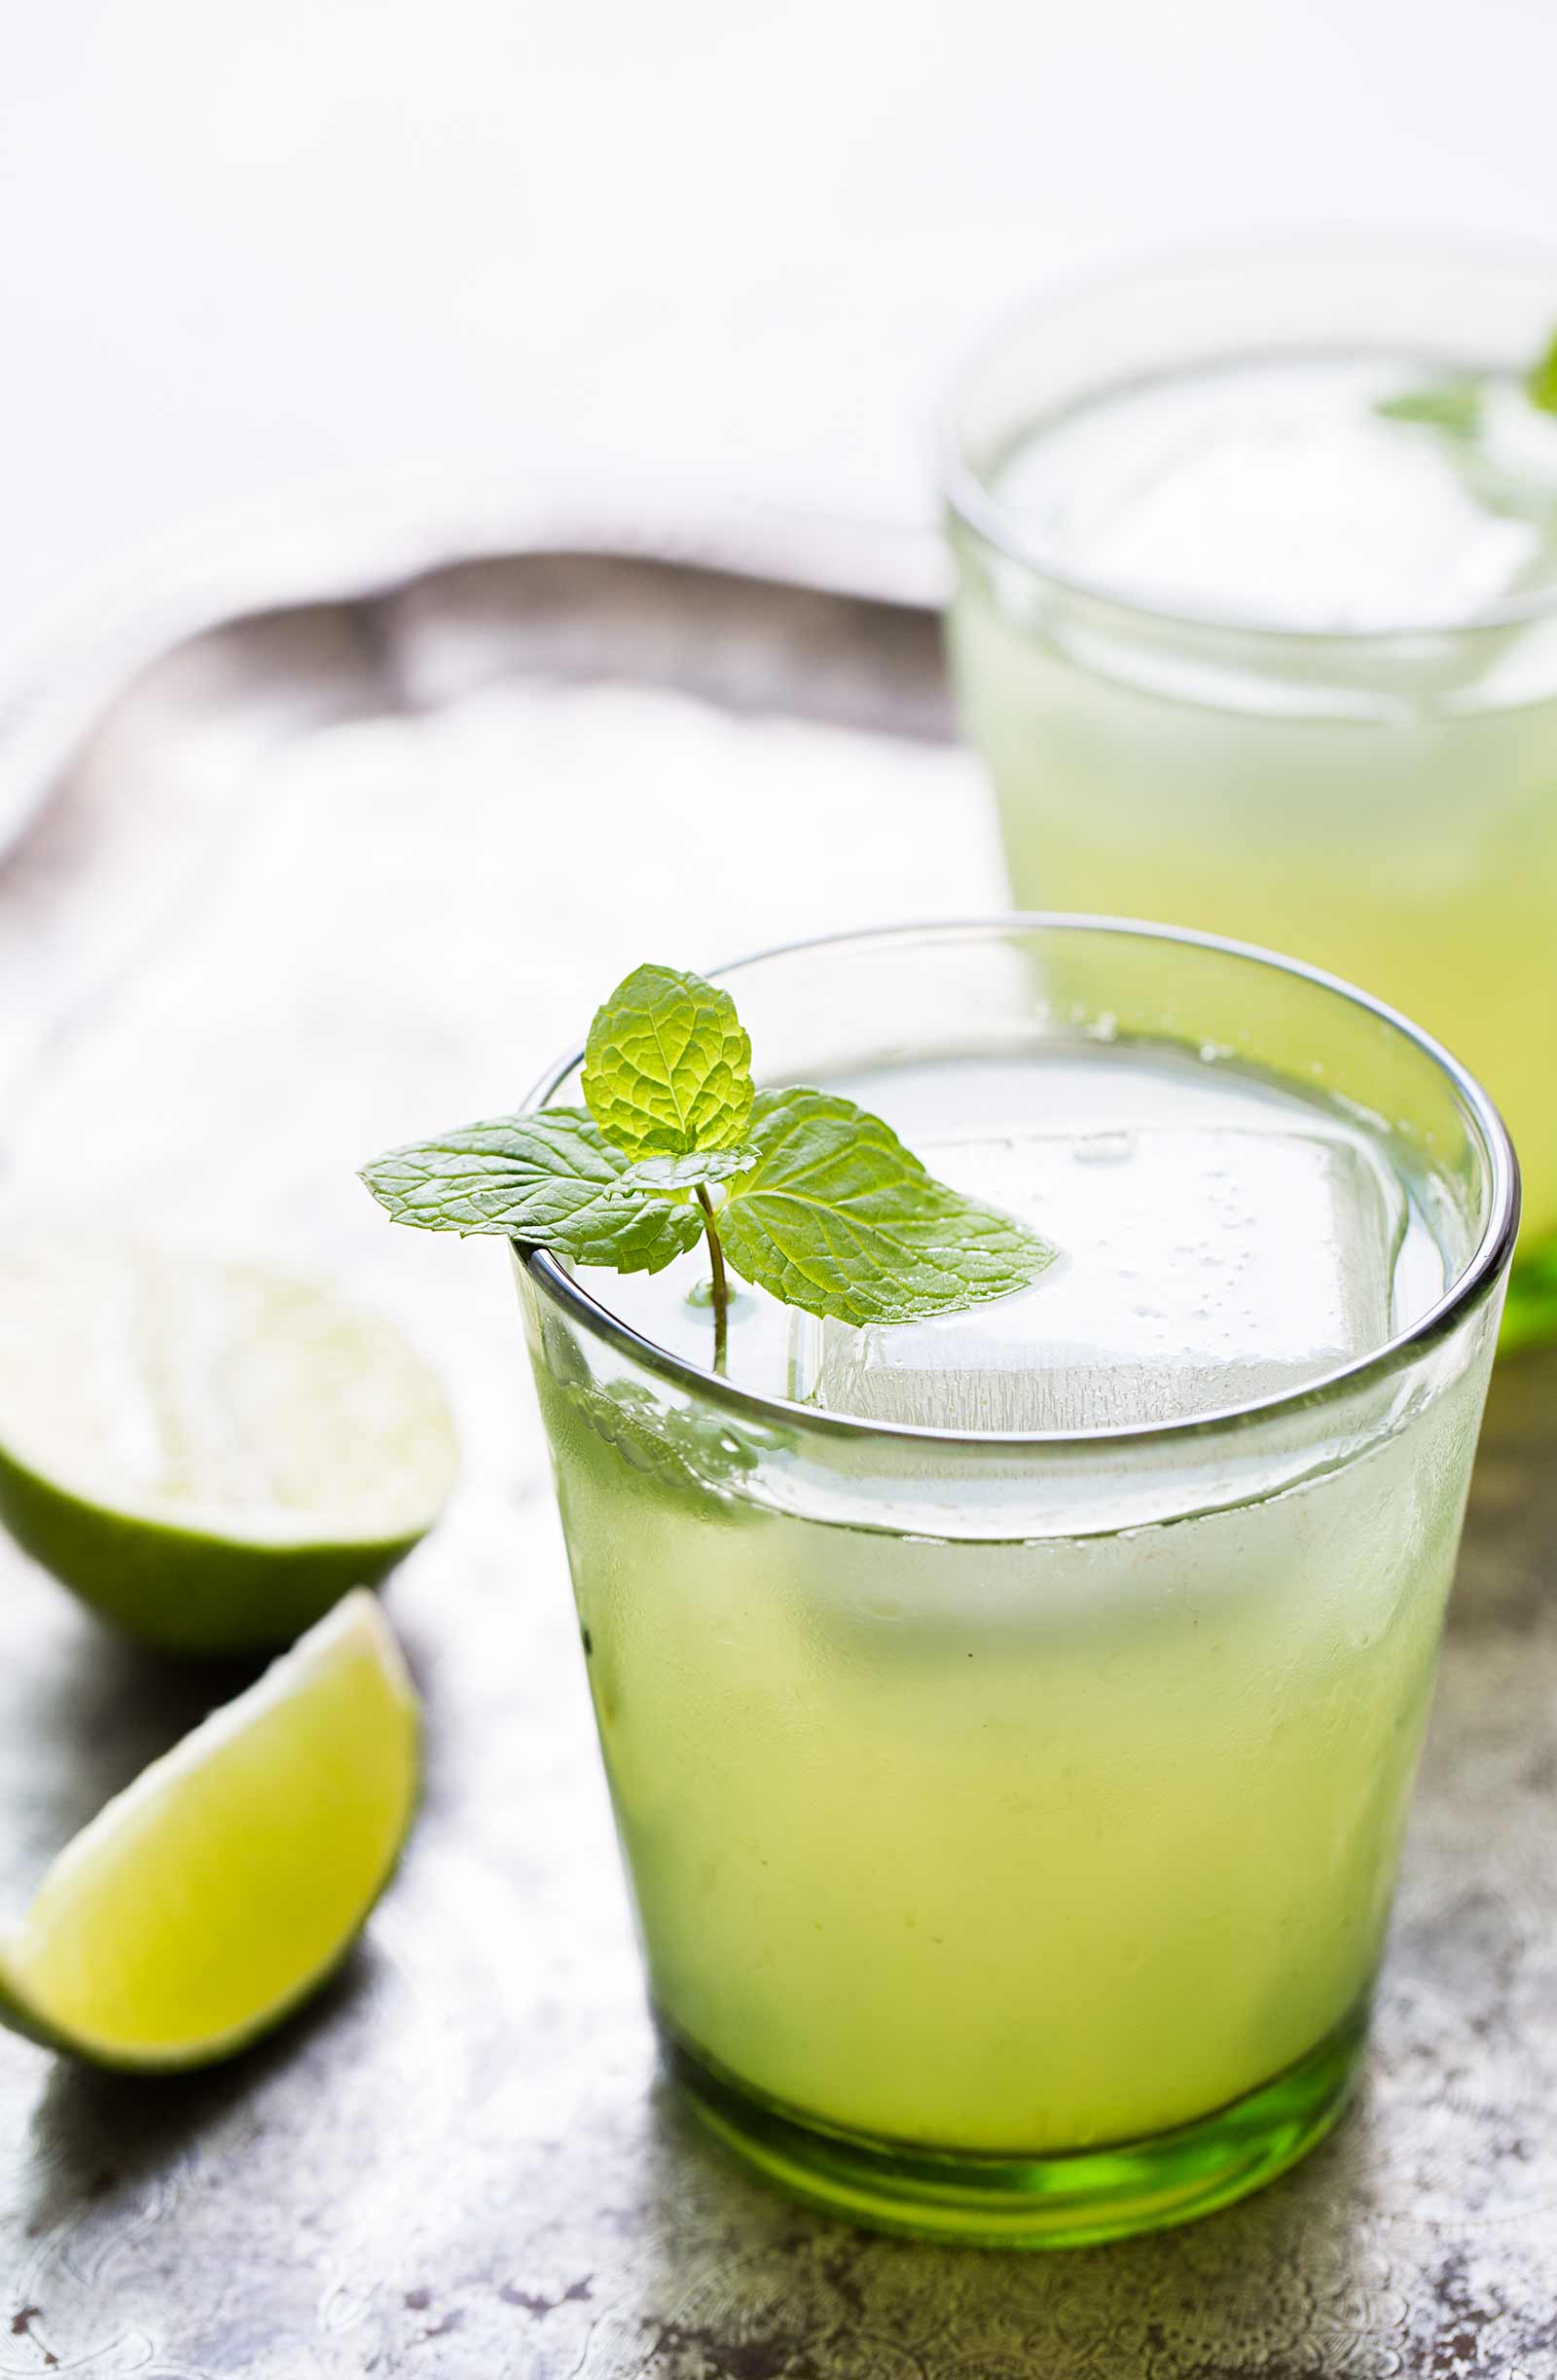 Limeade with a touch of mint